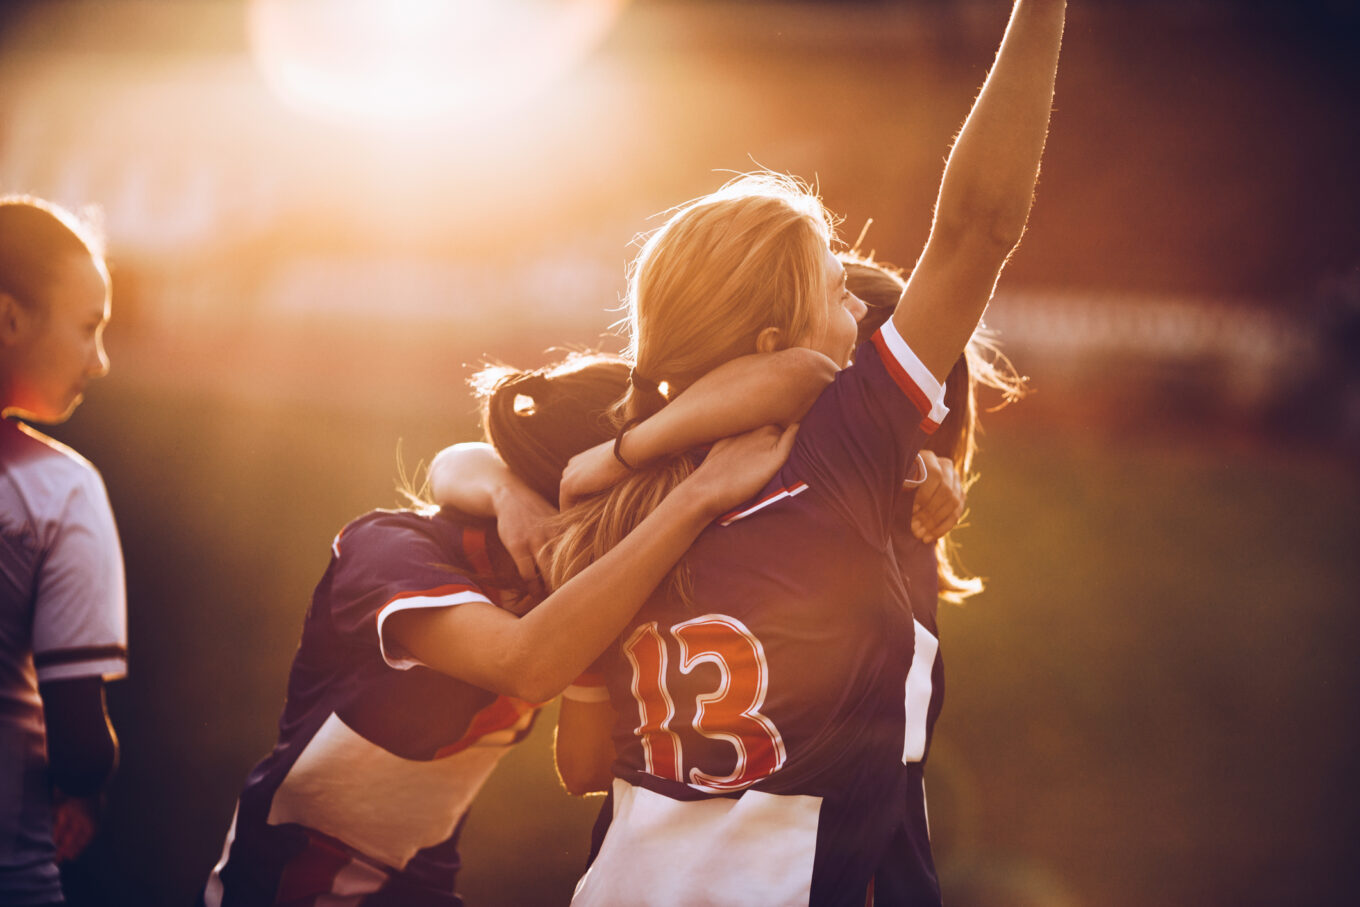 Team of happy female football players celebrating their achievement on a playing field at sunset.